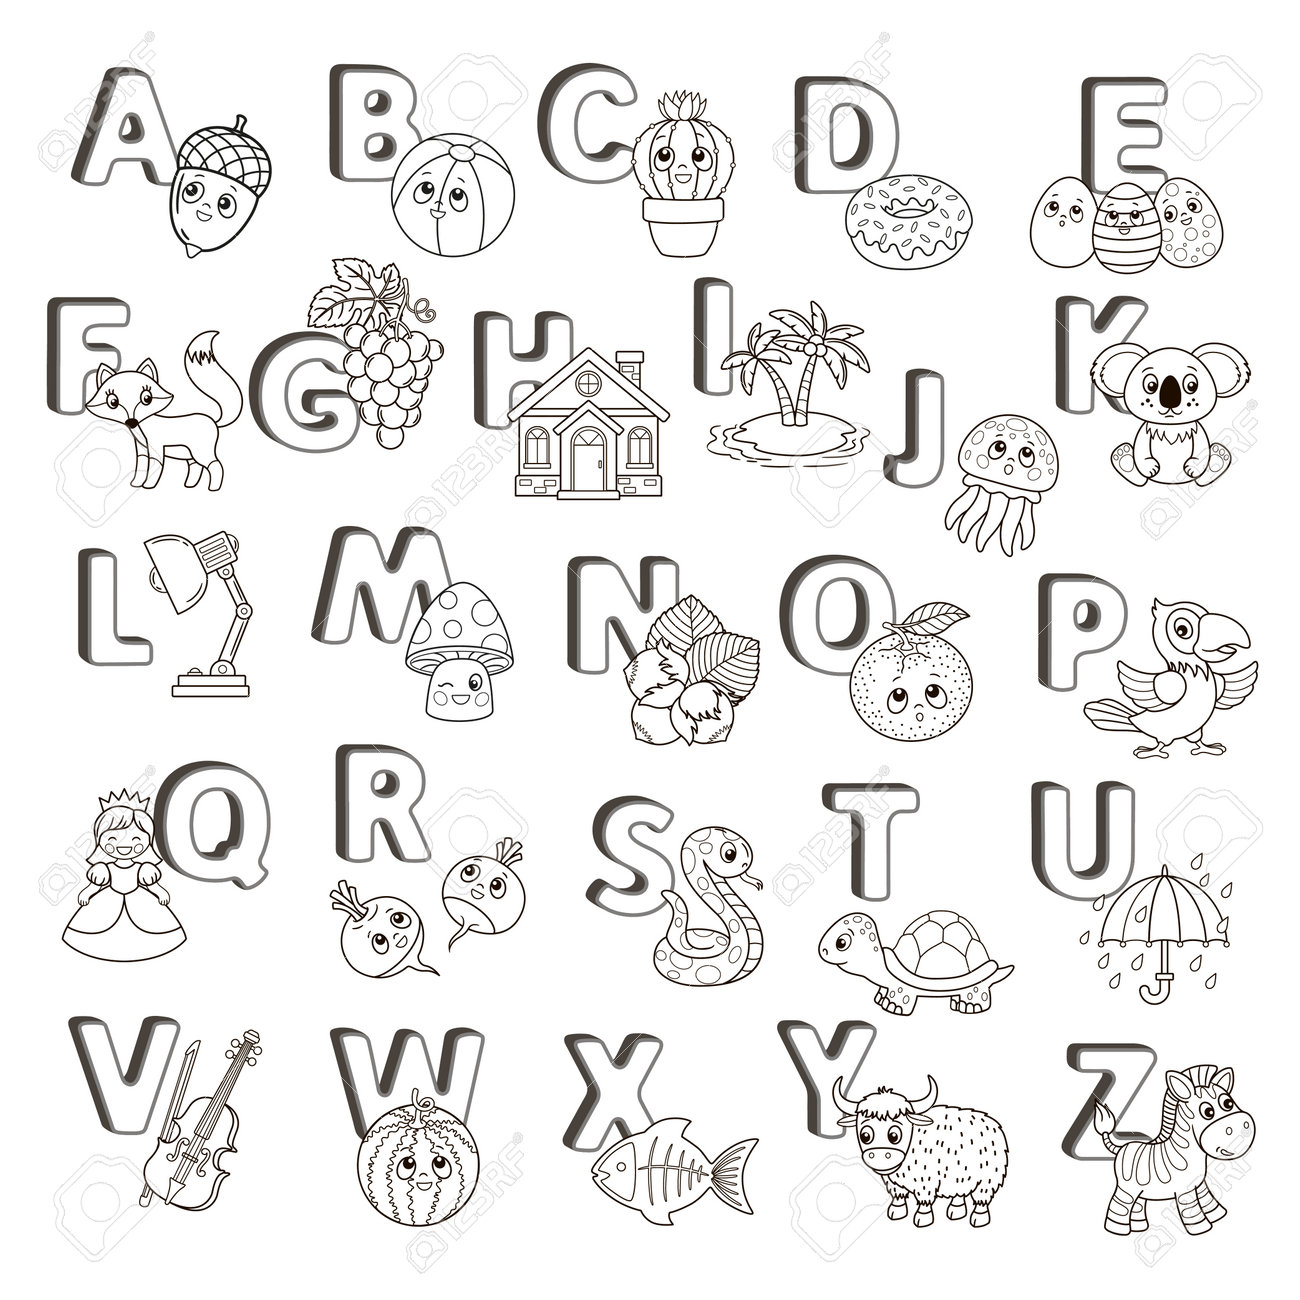 Vector coloring book alphabet with capital letters of the english and cute cartoon animals and things coloring page for kindergarten and preschool cards for learning english royalty free svg cliparts vectors and